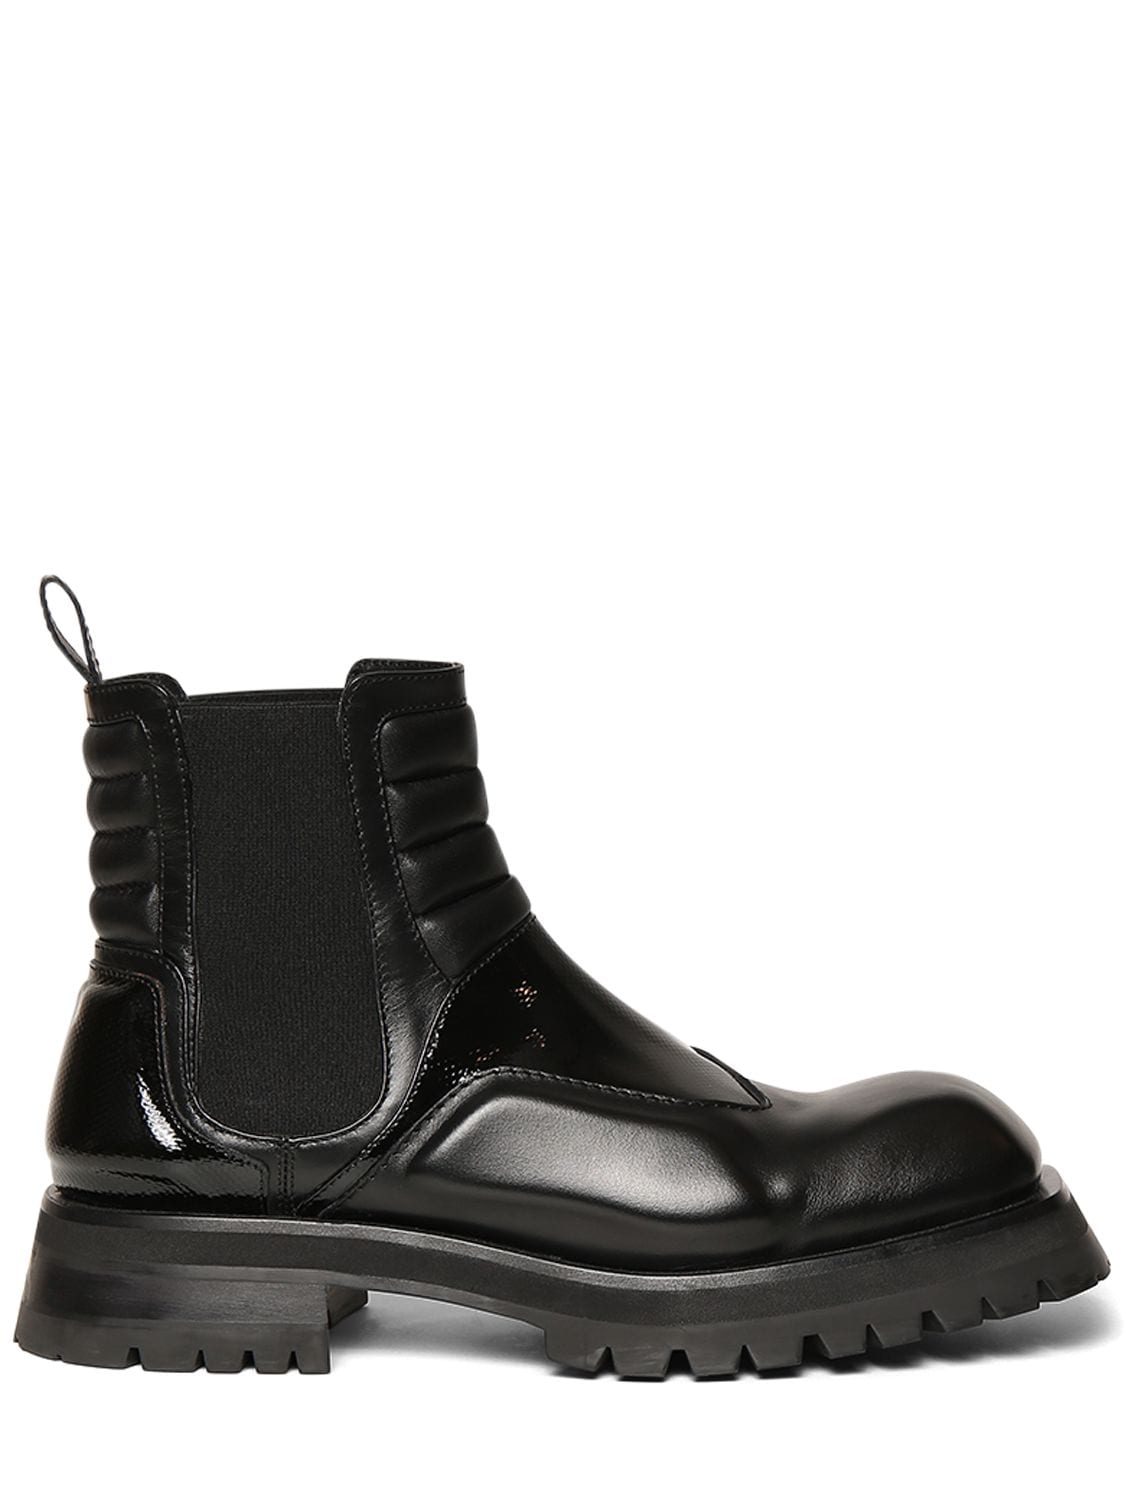 BALMAIN ARMY LEATHER CHELSEA BOOTS